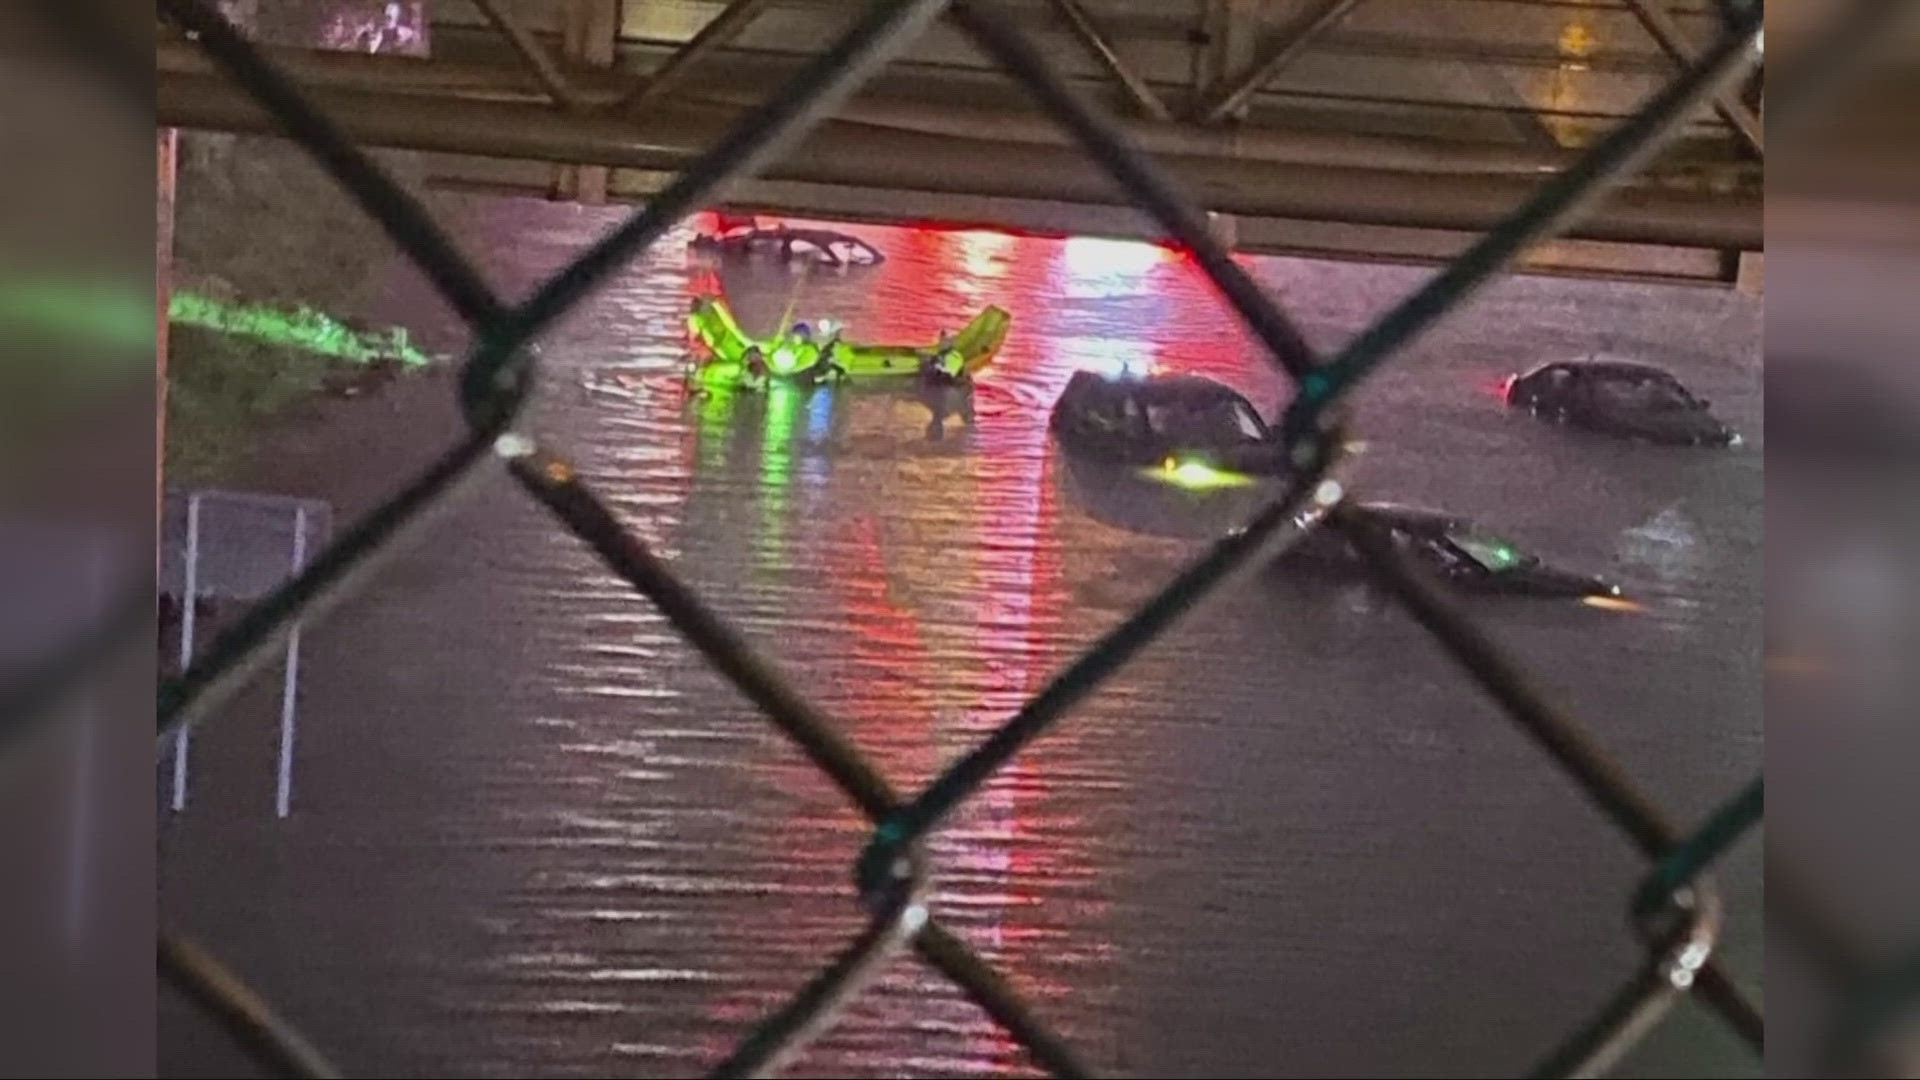 Ten people were rescued from I-90 during Wednesday night's storms. Kaitor Kay spoke to officials from ODOT and the Lakewood Police Department to get answers.